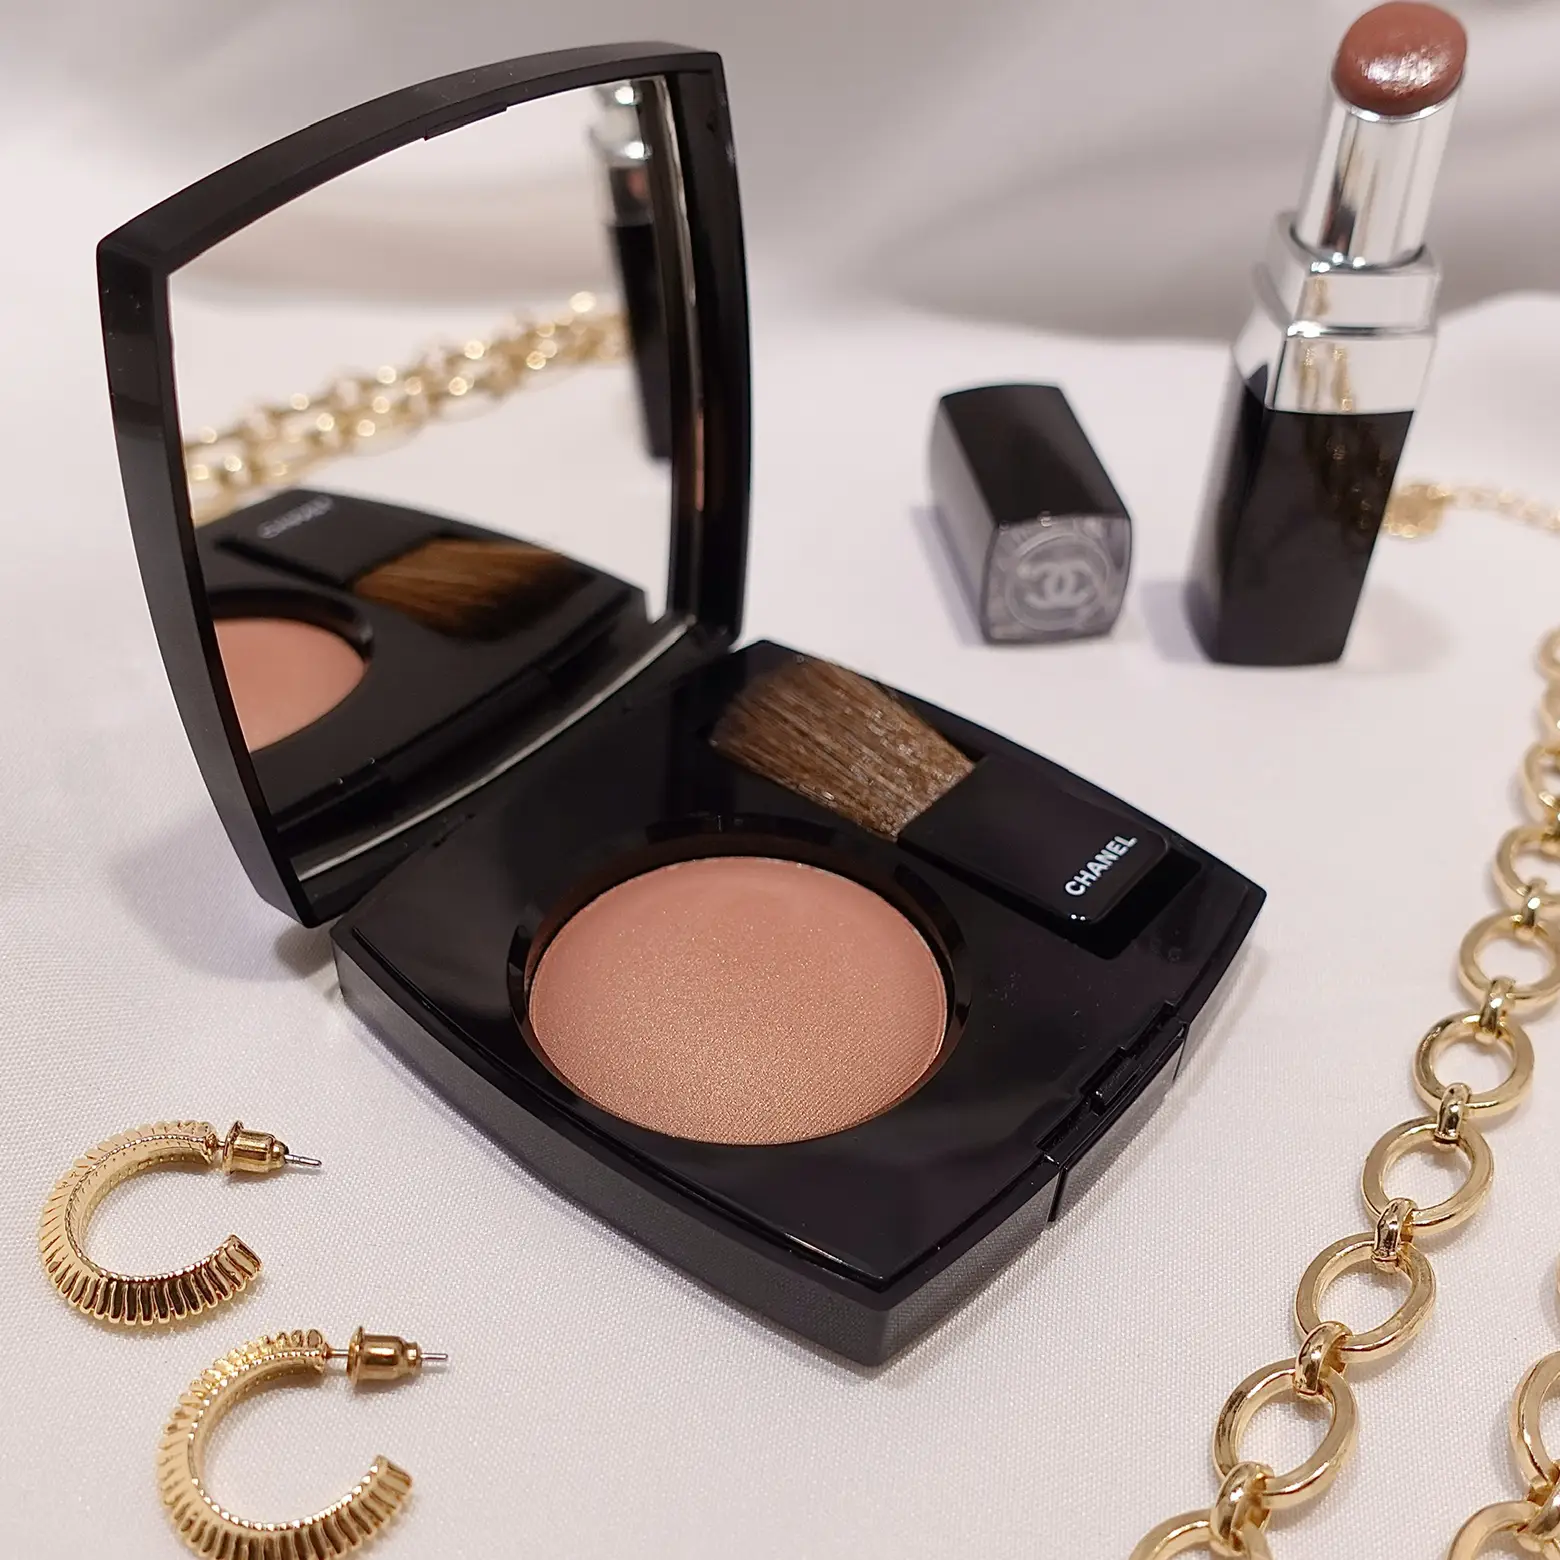 Chanel Blush 80 Jersey Glowing Cheek Bunch Very Beautiful 🥰, Gallery  posted by NattapornJade